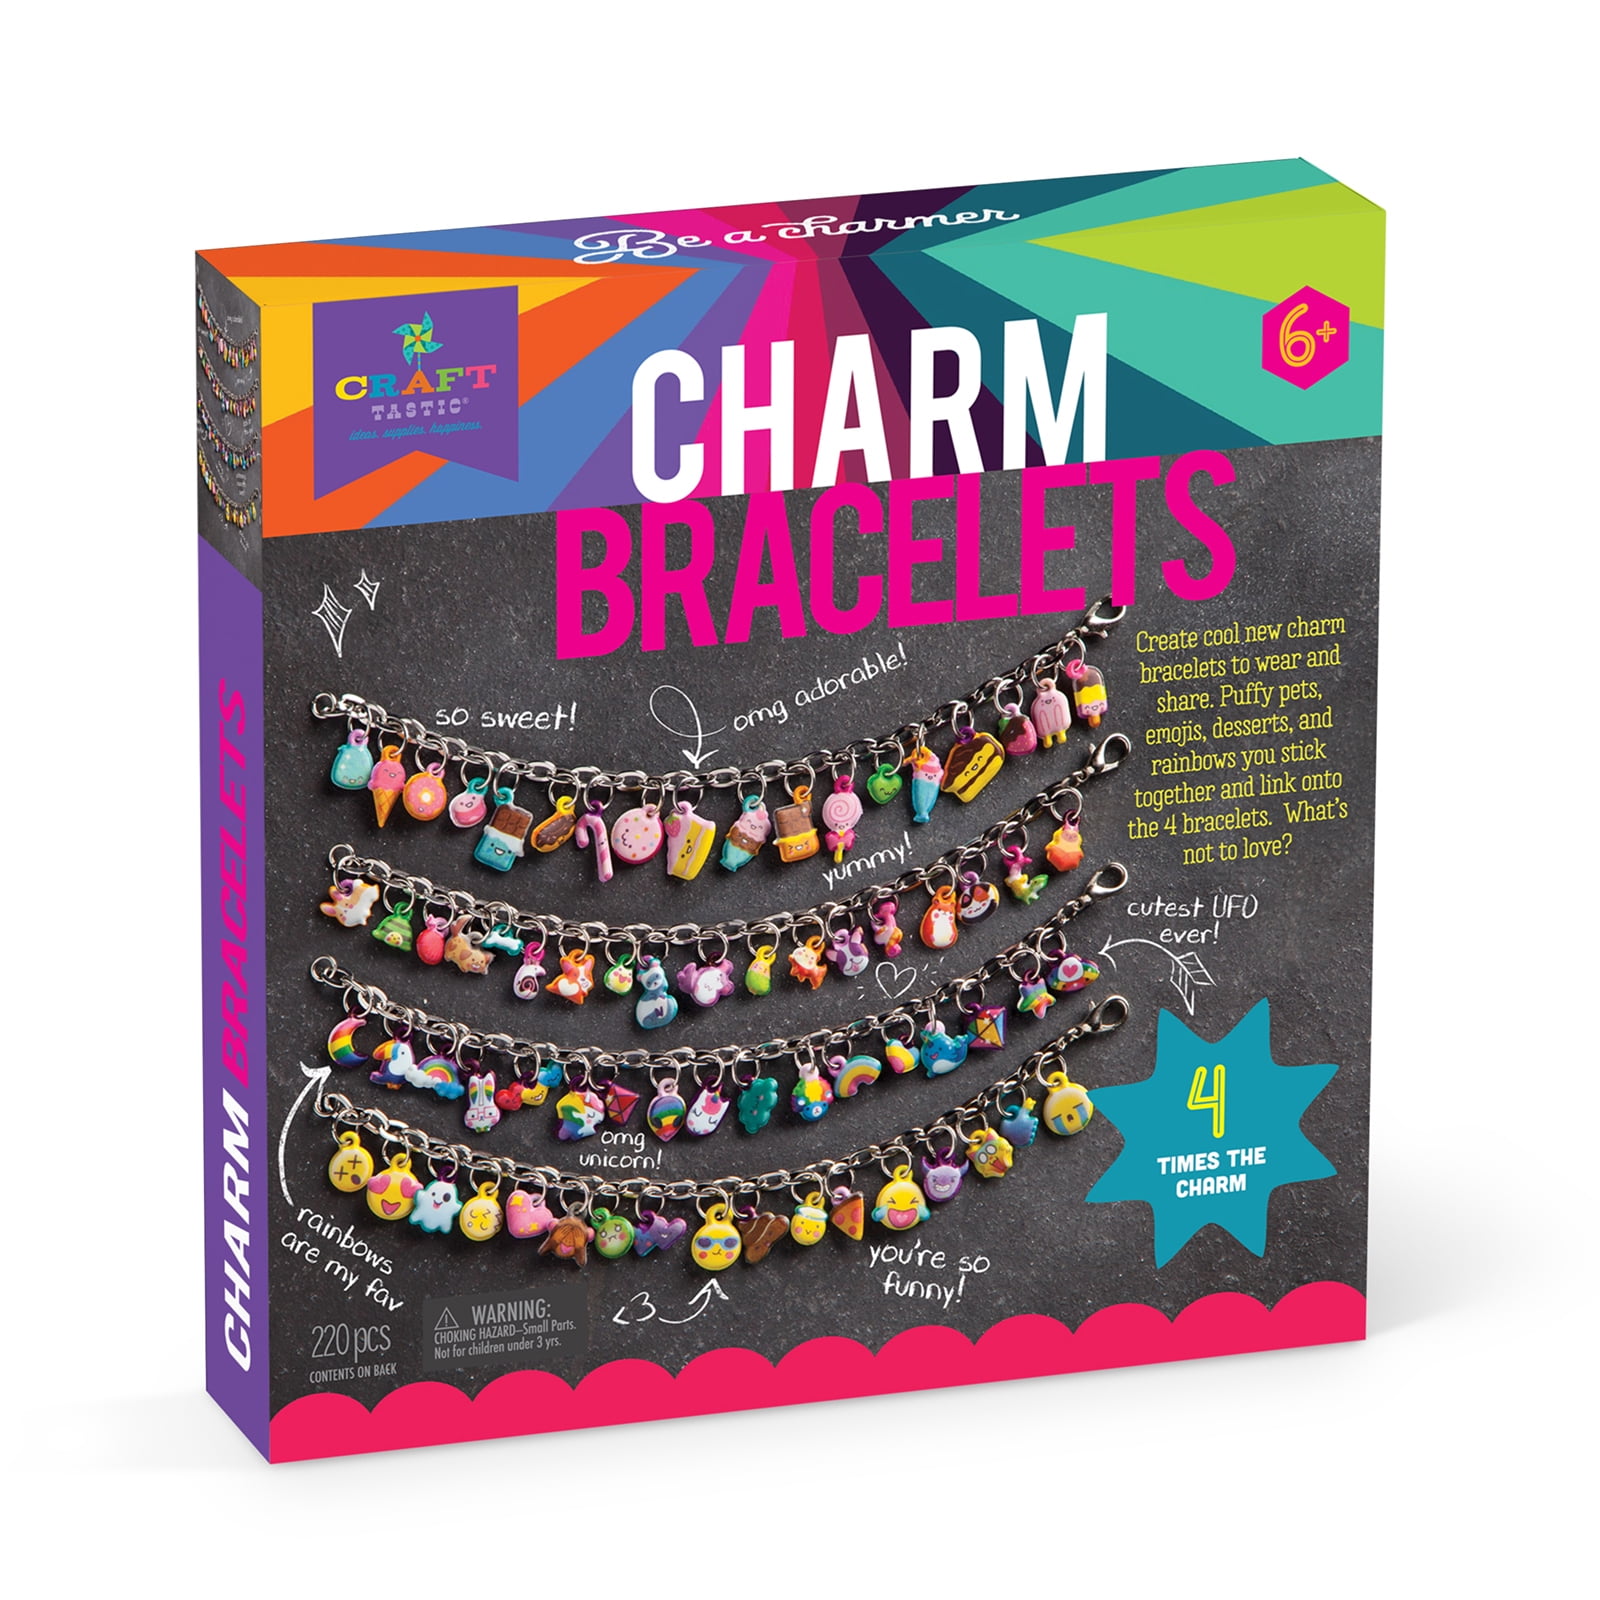 DIY Charm Bracelet Making Kit Baymyer 76 Pcs Jewelry Making Supplies with Snake Chain Charm Beads for Bracelet Jewelry Making Crafts Jewelry Making Charm Kit for Women Girls